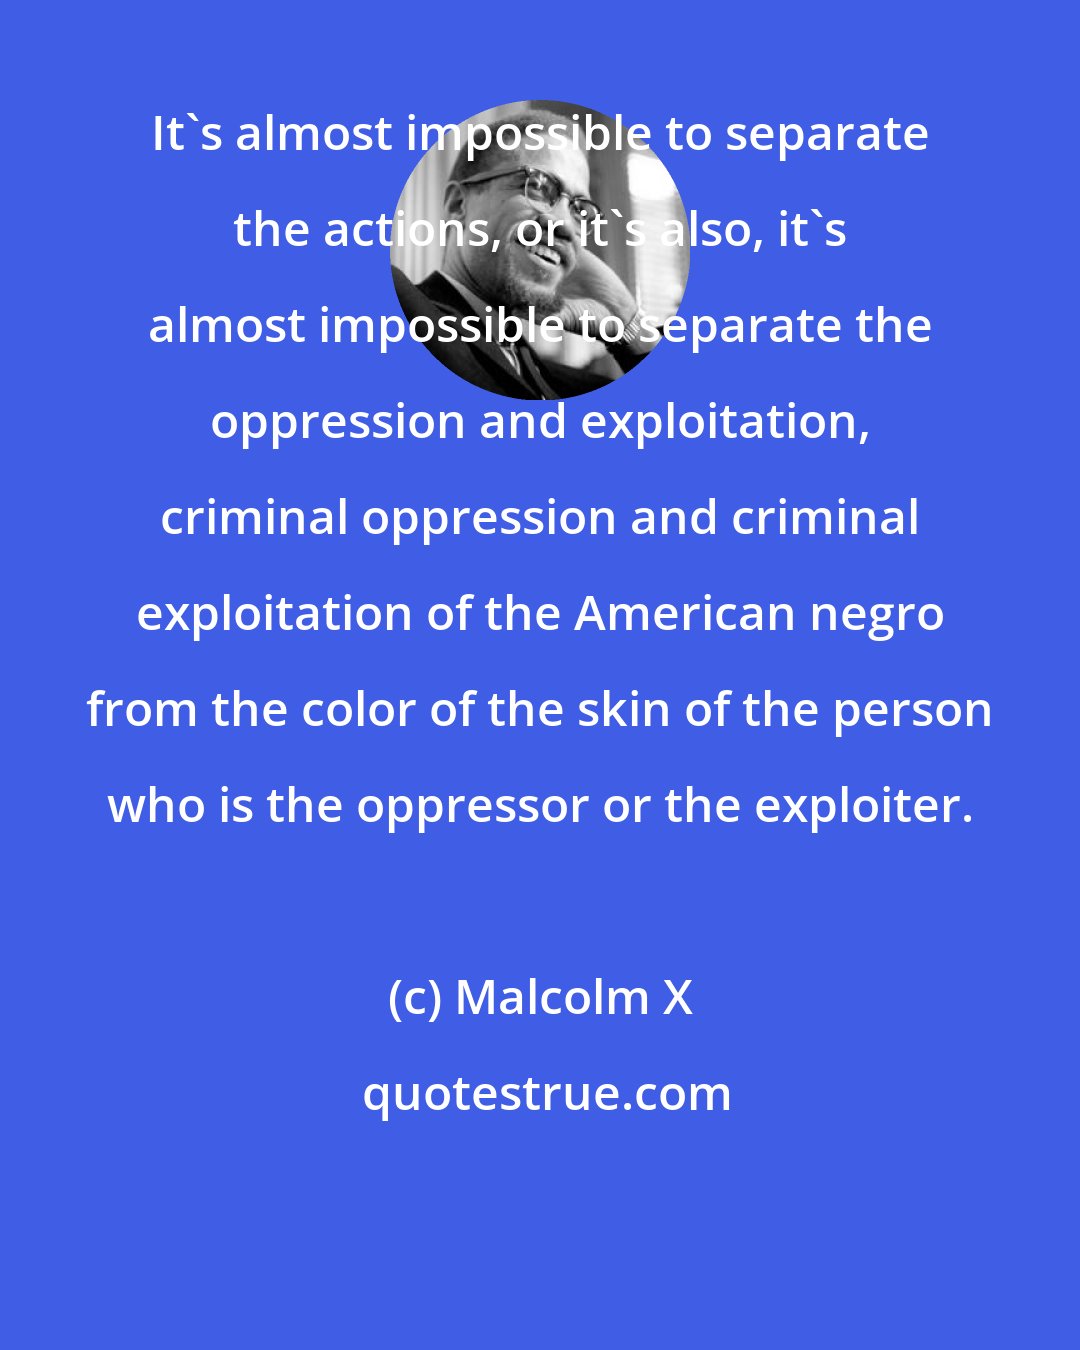 Malcolm X: It's almost impossible to separate the actions, or it's also, it's almost impossible to separate the oppression and exploitation, criminal oppression and criminal exploitation of the American negro from the color of the skin of the person who is the oppressor or the exploiter.